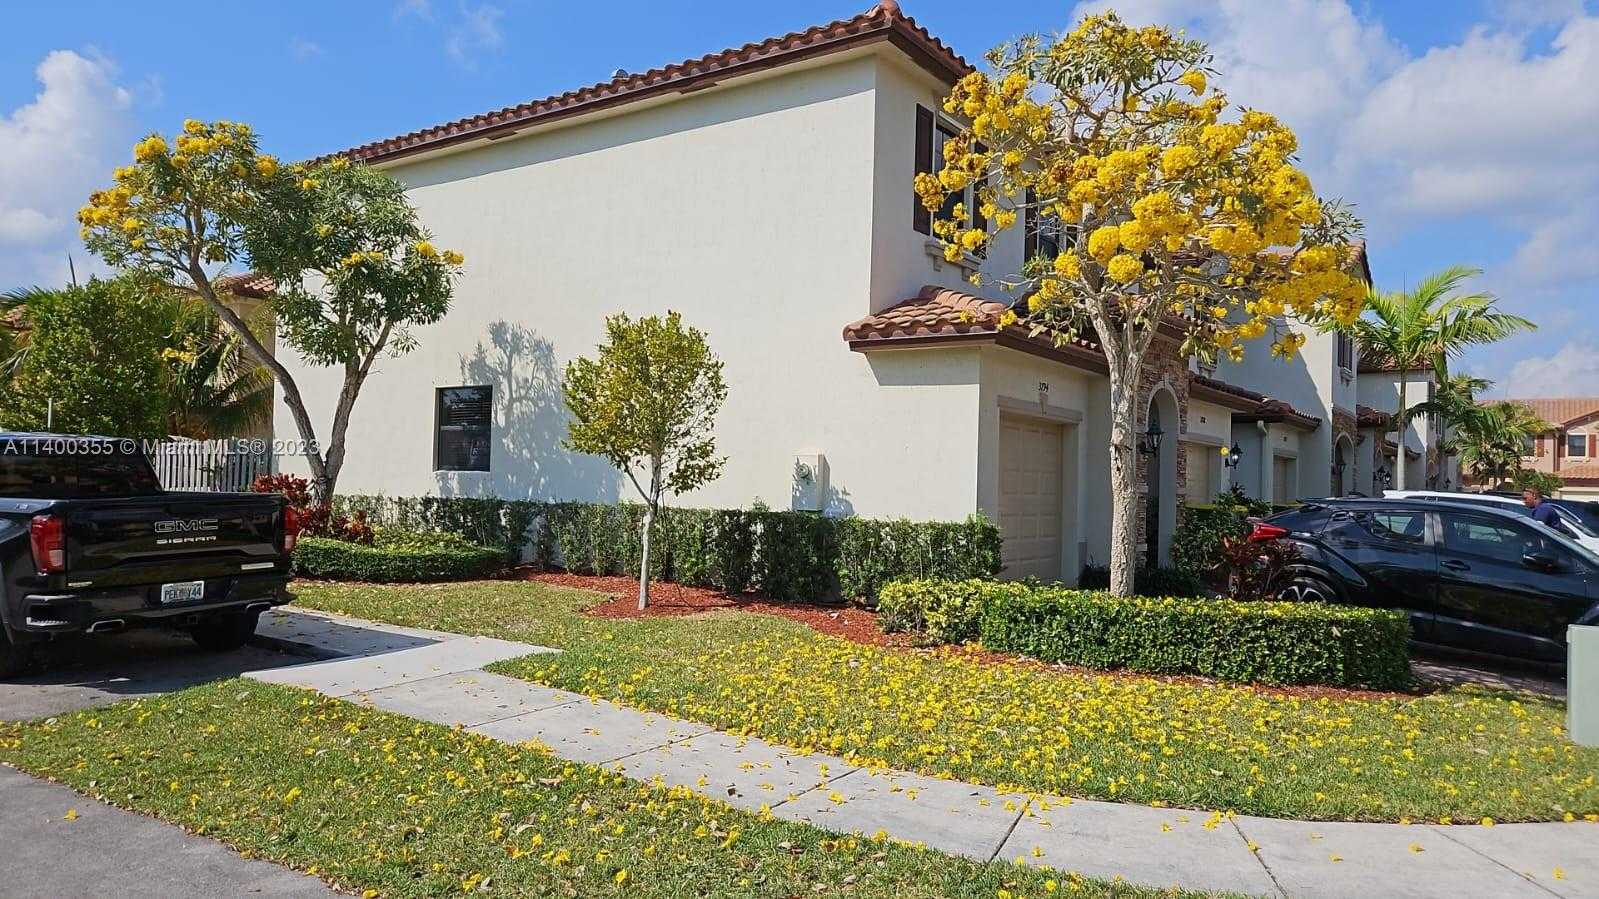 View Homestead, FL 33033 townhome